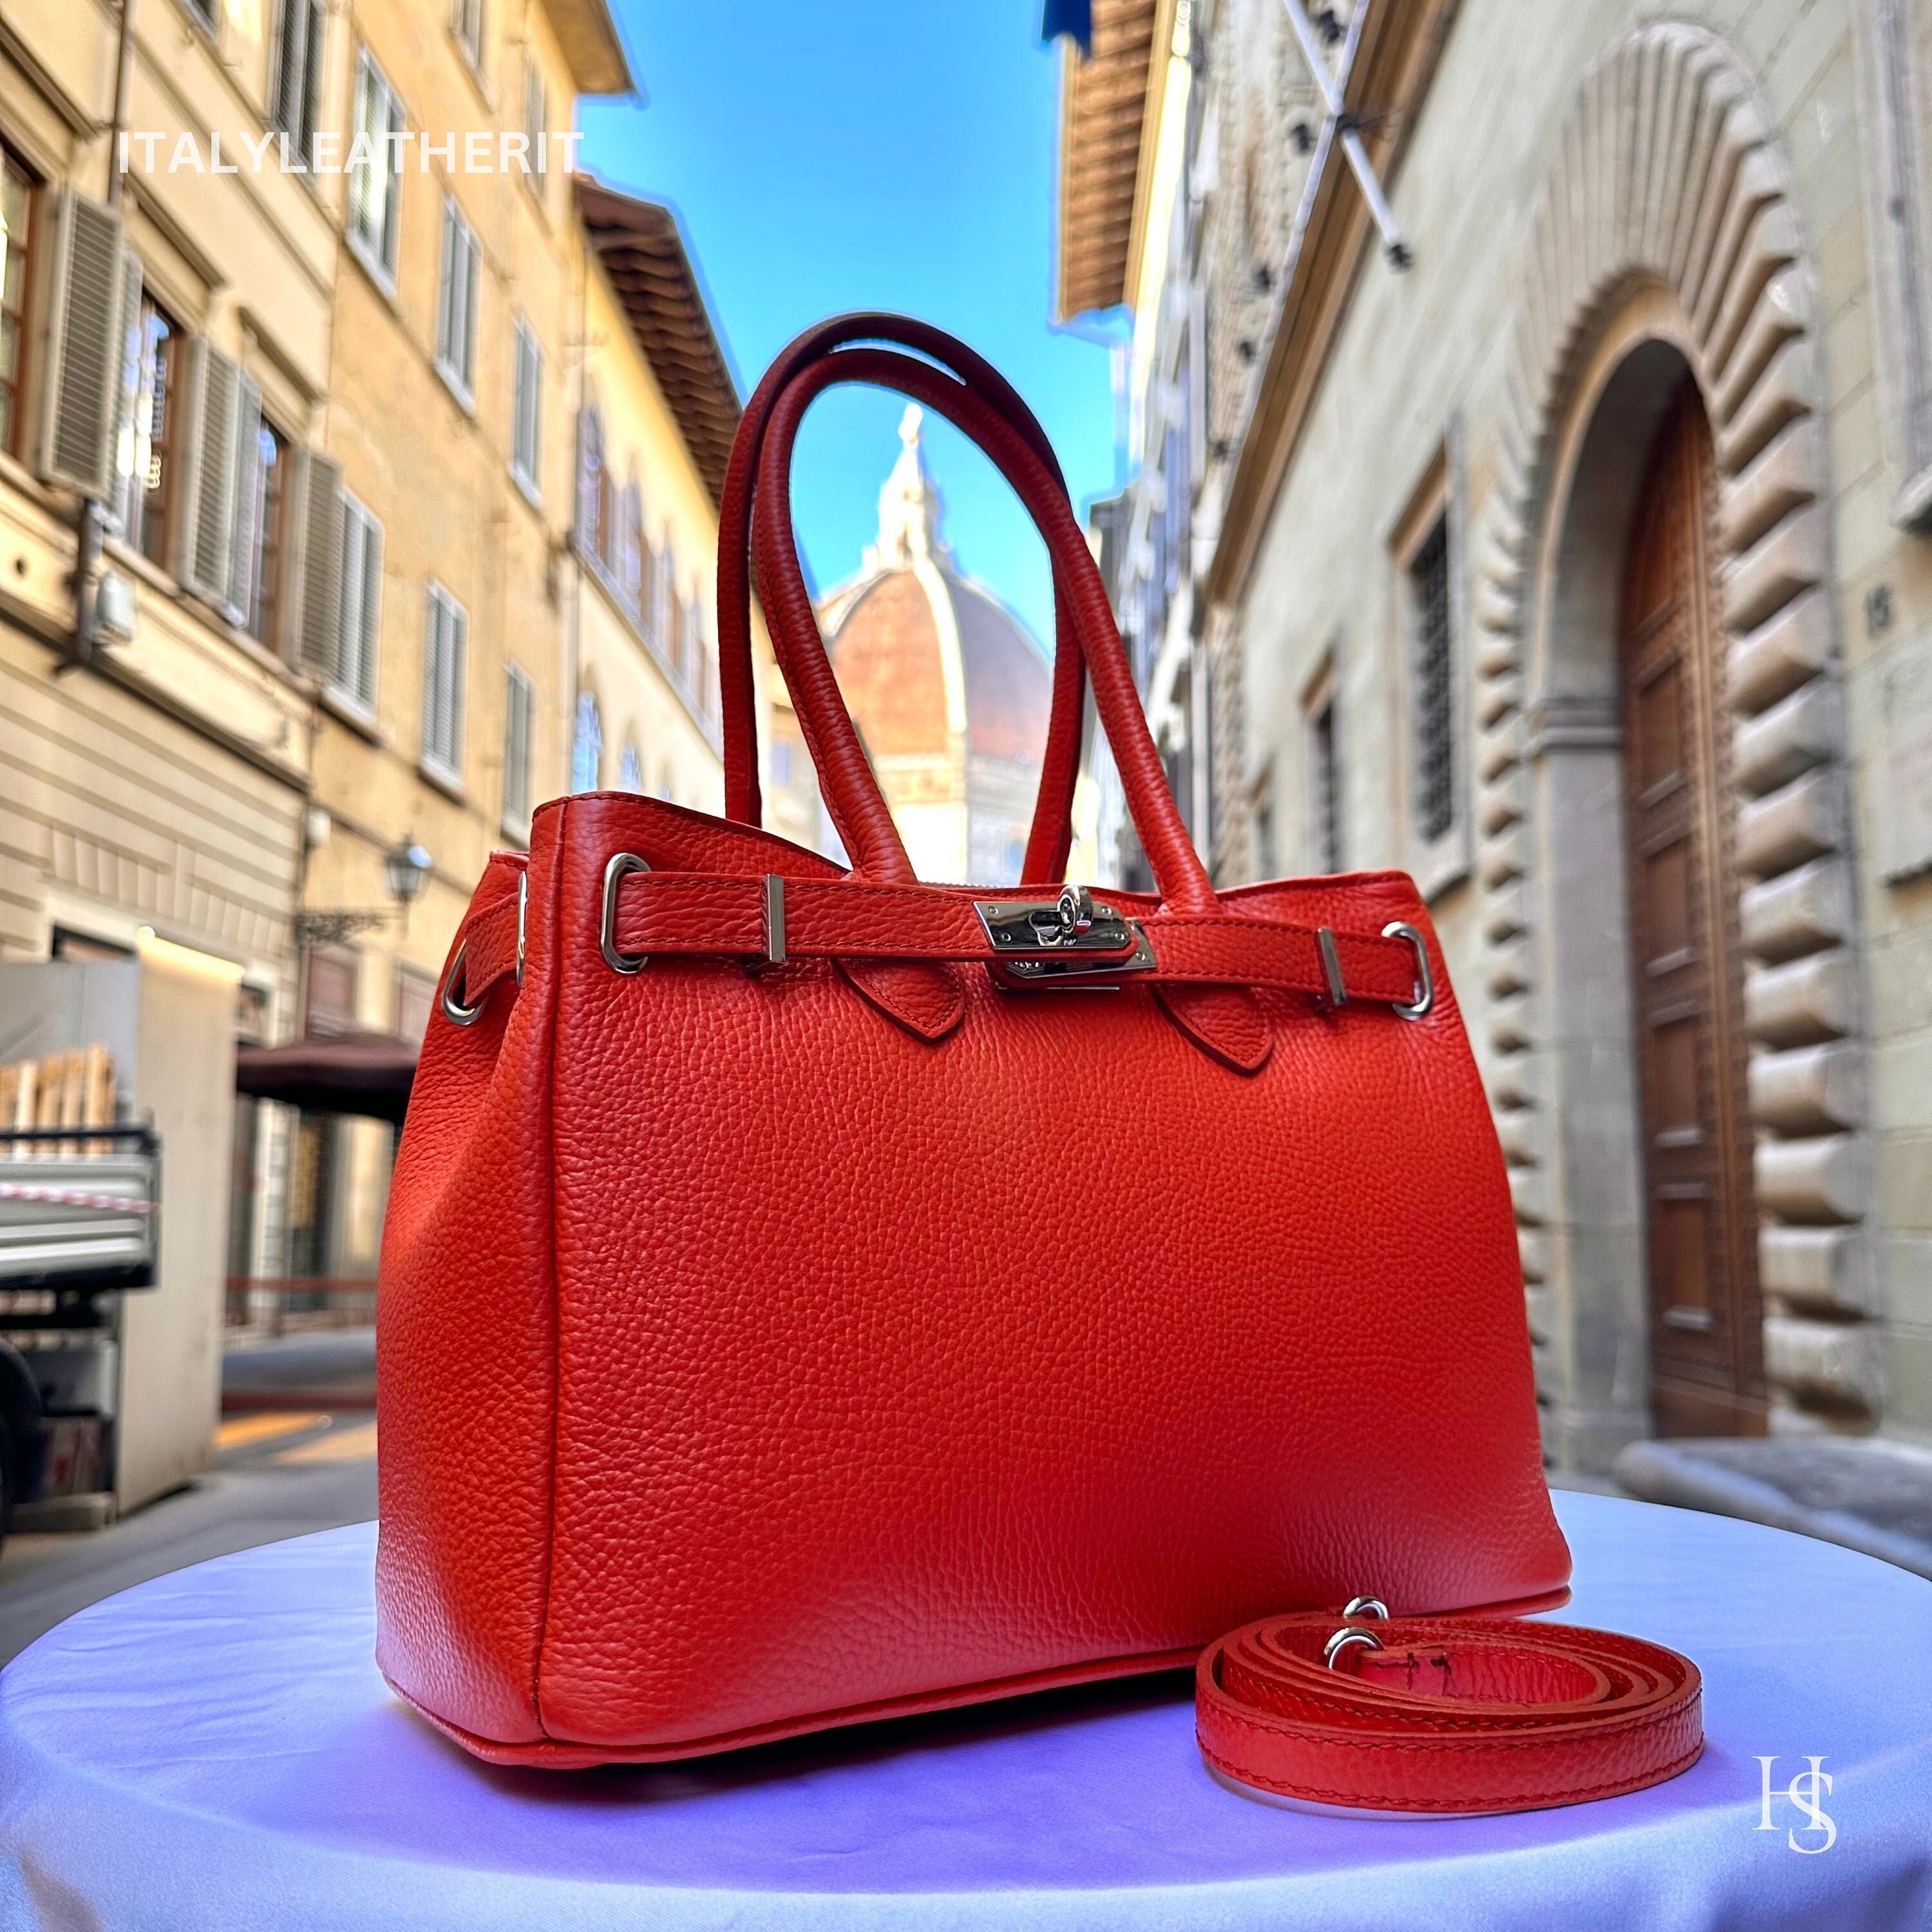 Handmade by Hermes. - 9 practical scenes and outfits for BIRKIN 25